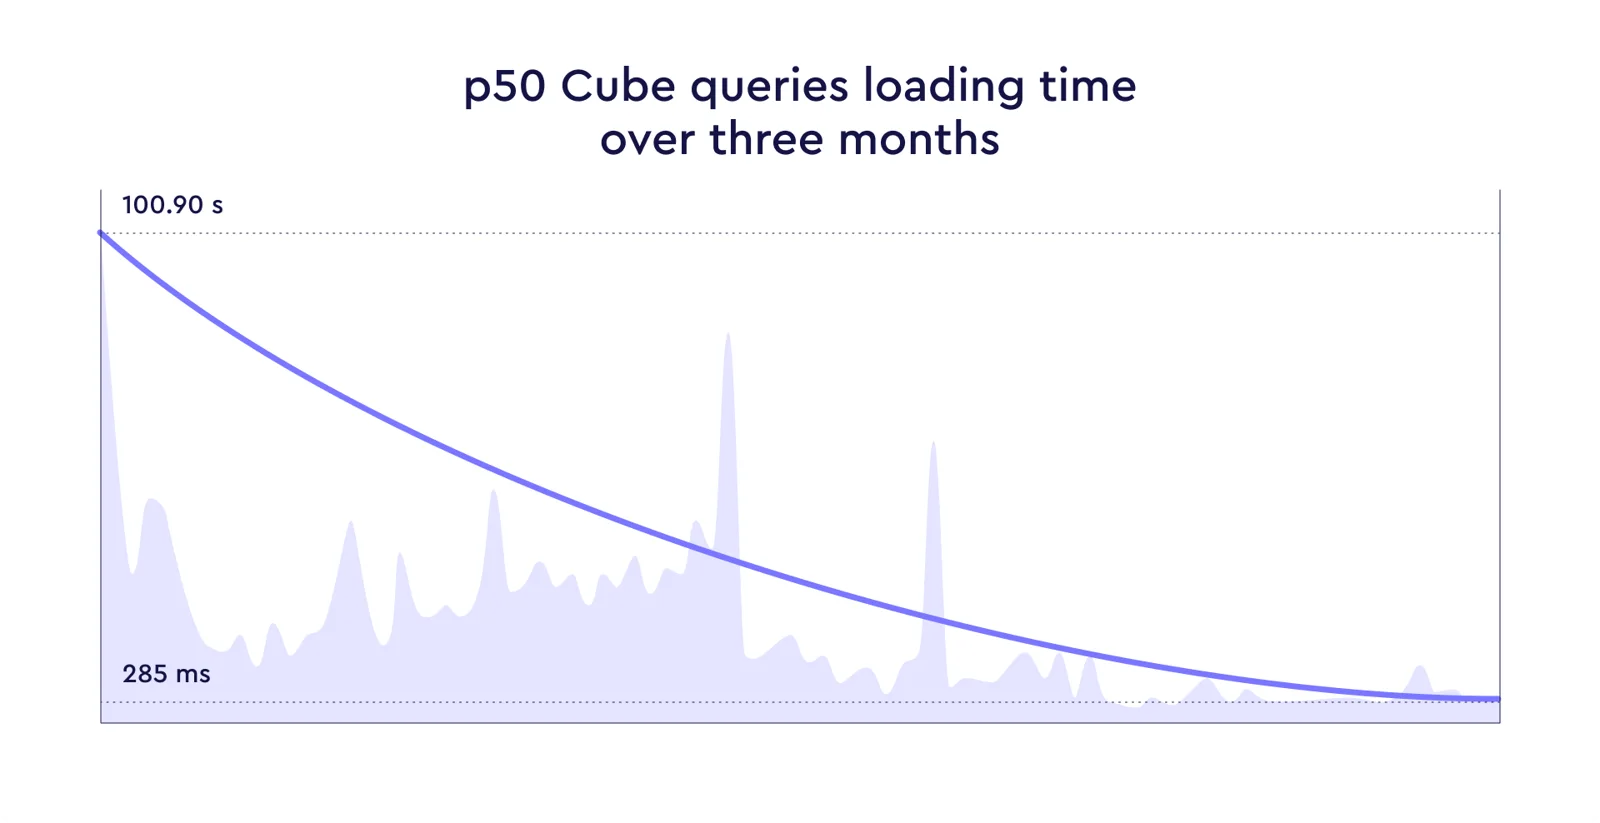 Figure 2: Queries loading time